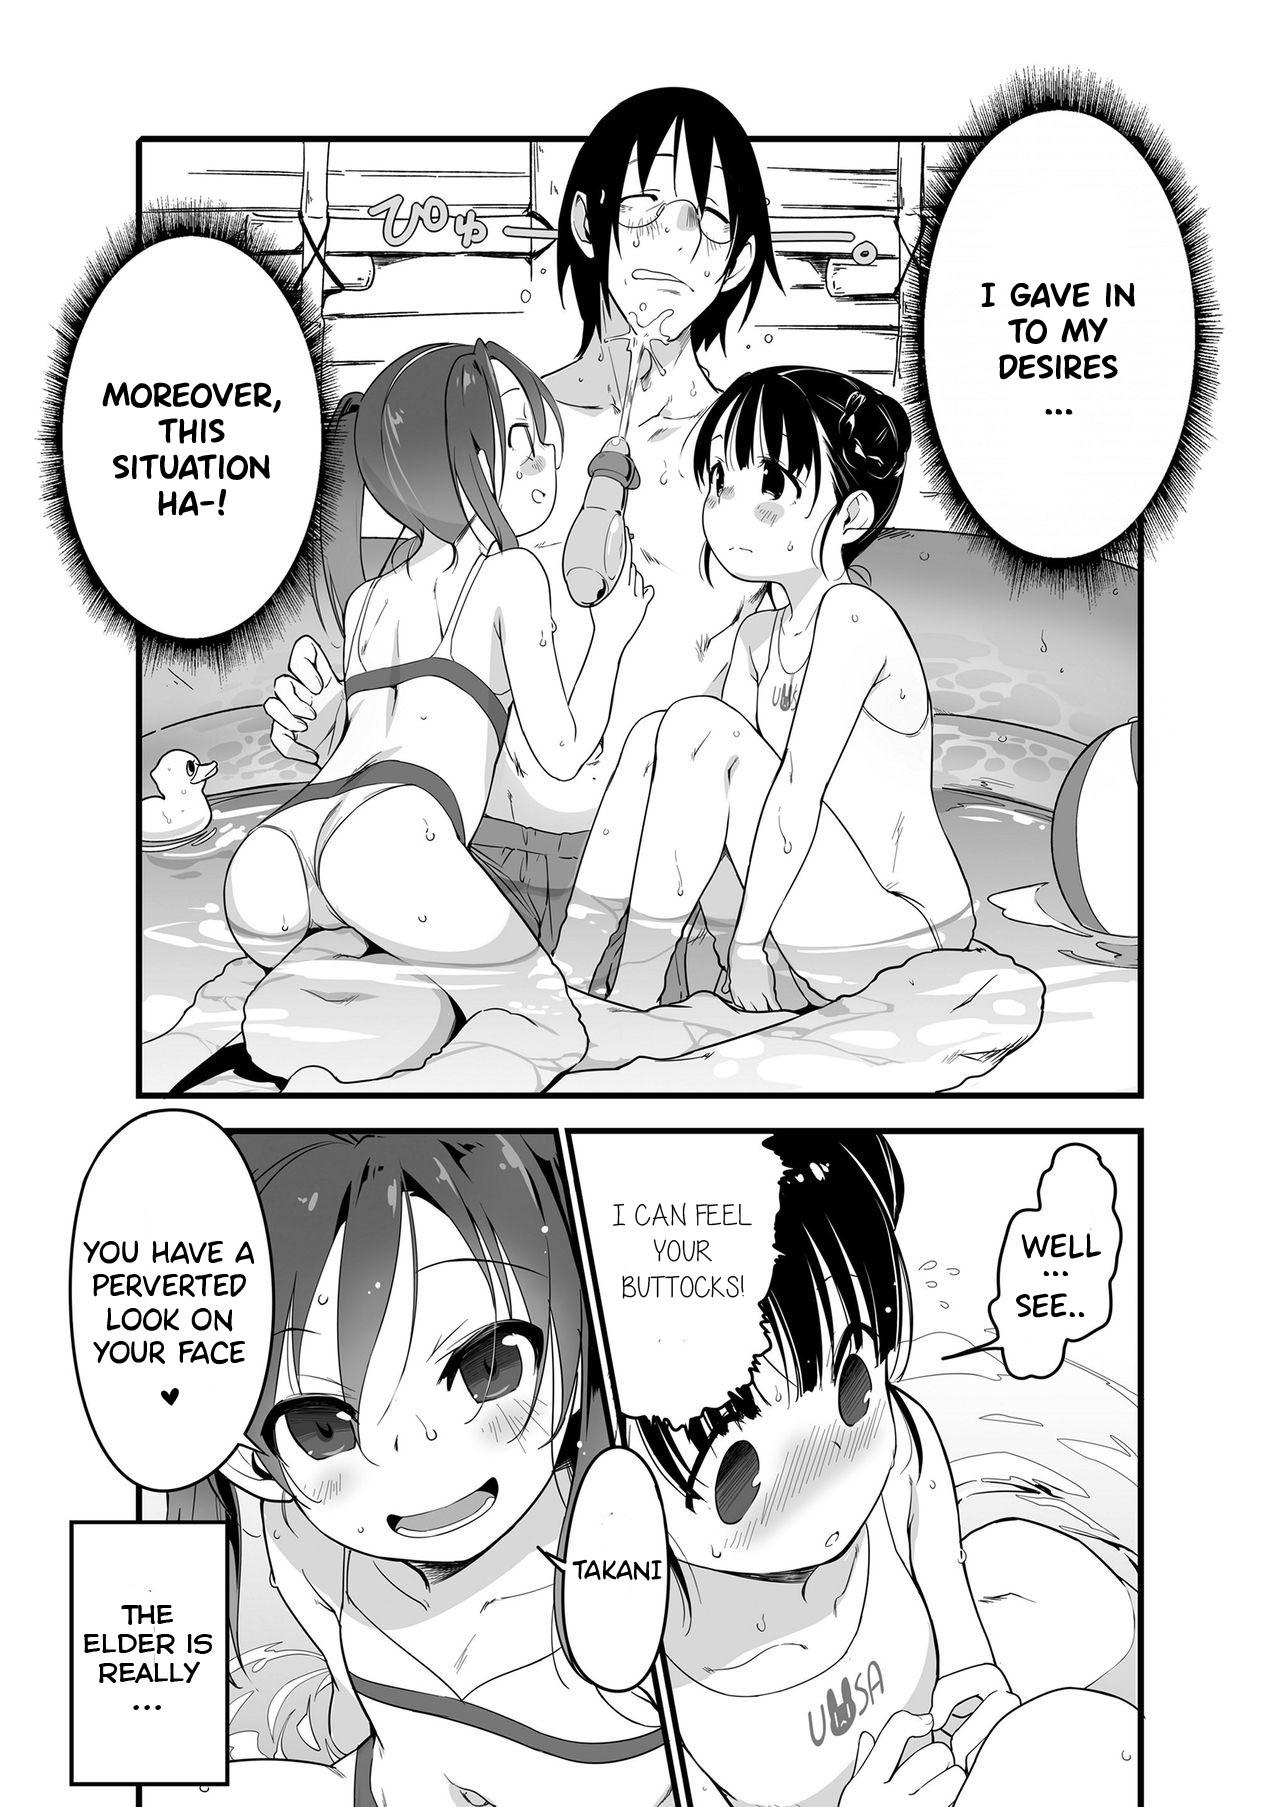 Orgasm Uchiage Hanabi, Ane to Miruka? Imouto to Miruka? | Fireworks, Should we see it with the elder sister or the younger sister? Highheels - Page 6